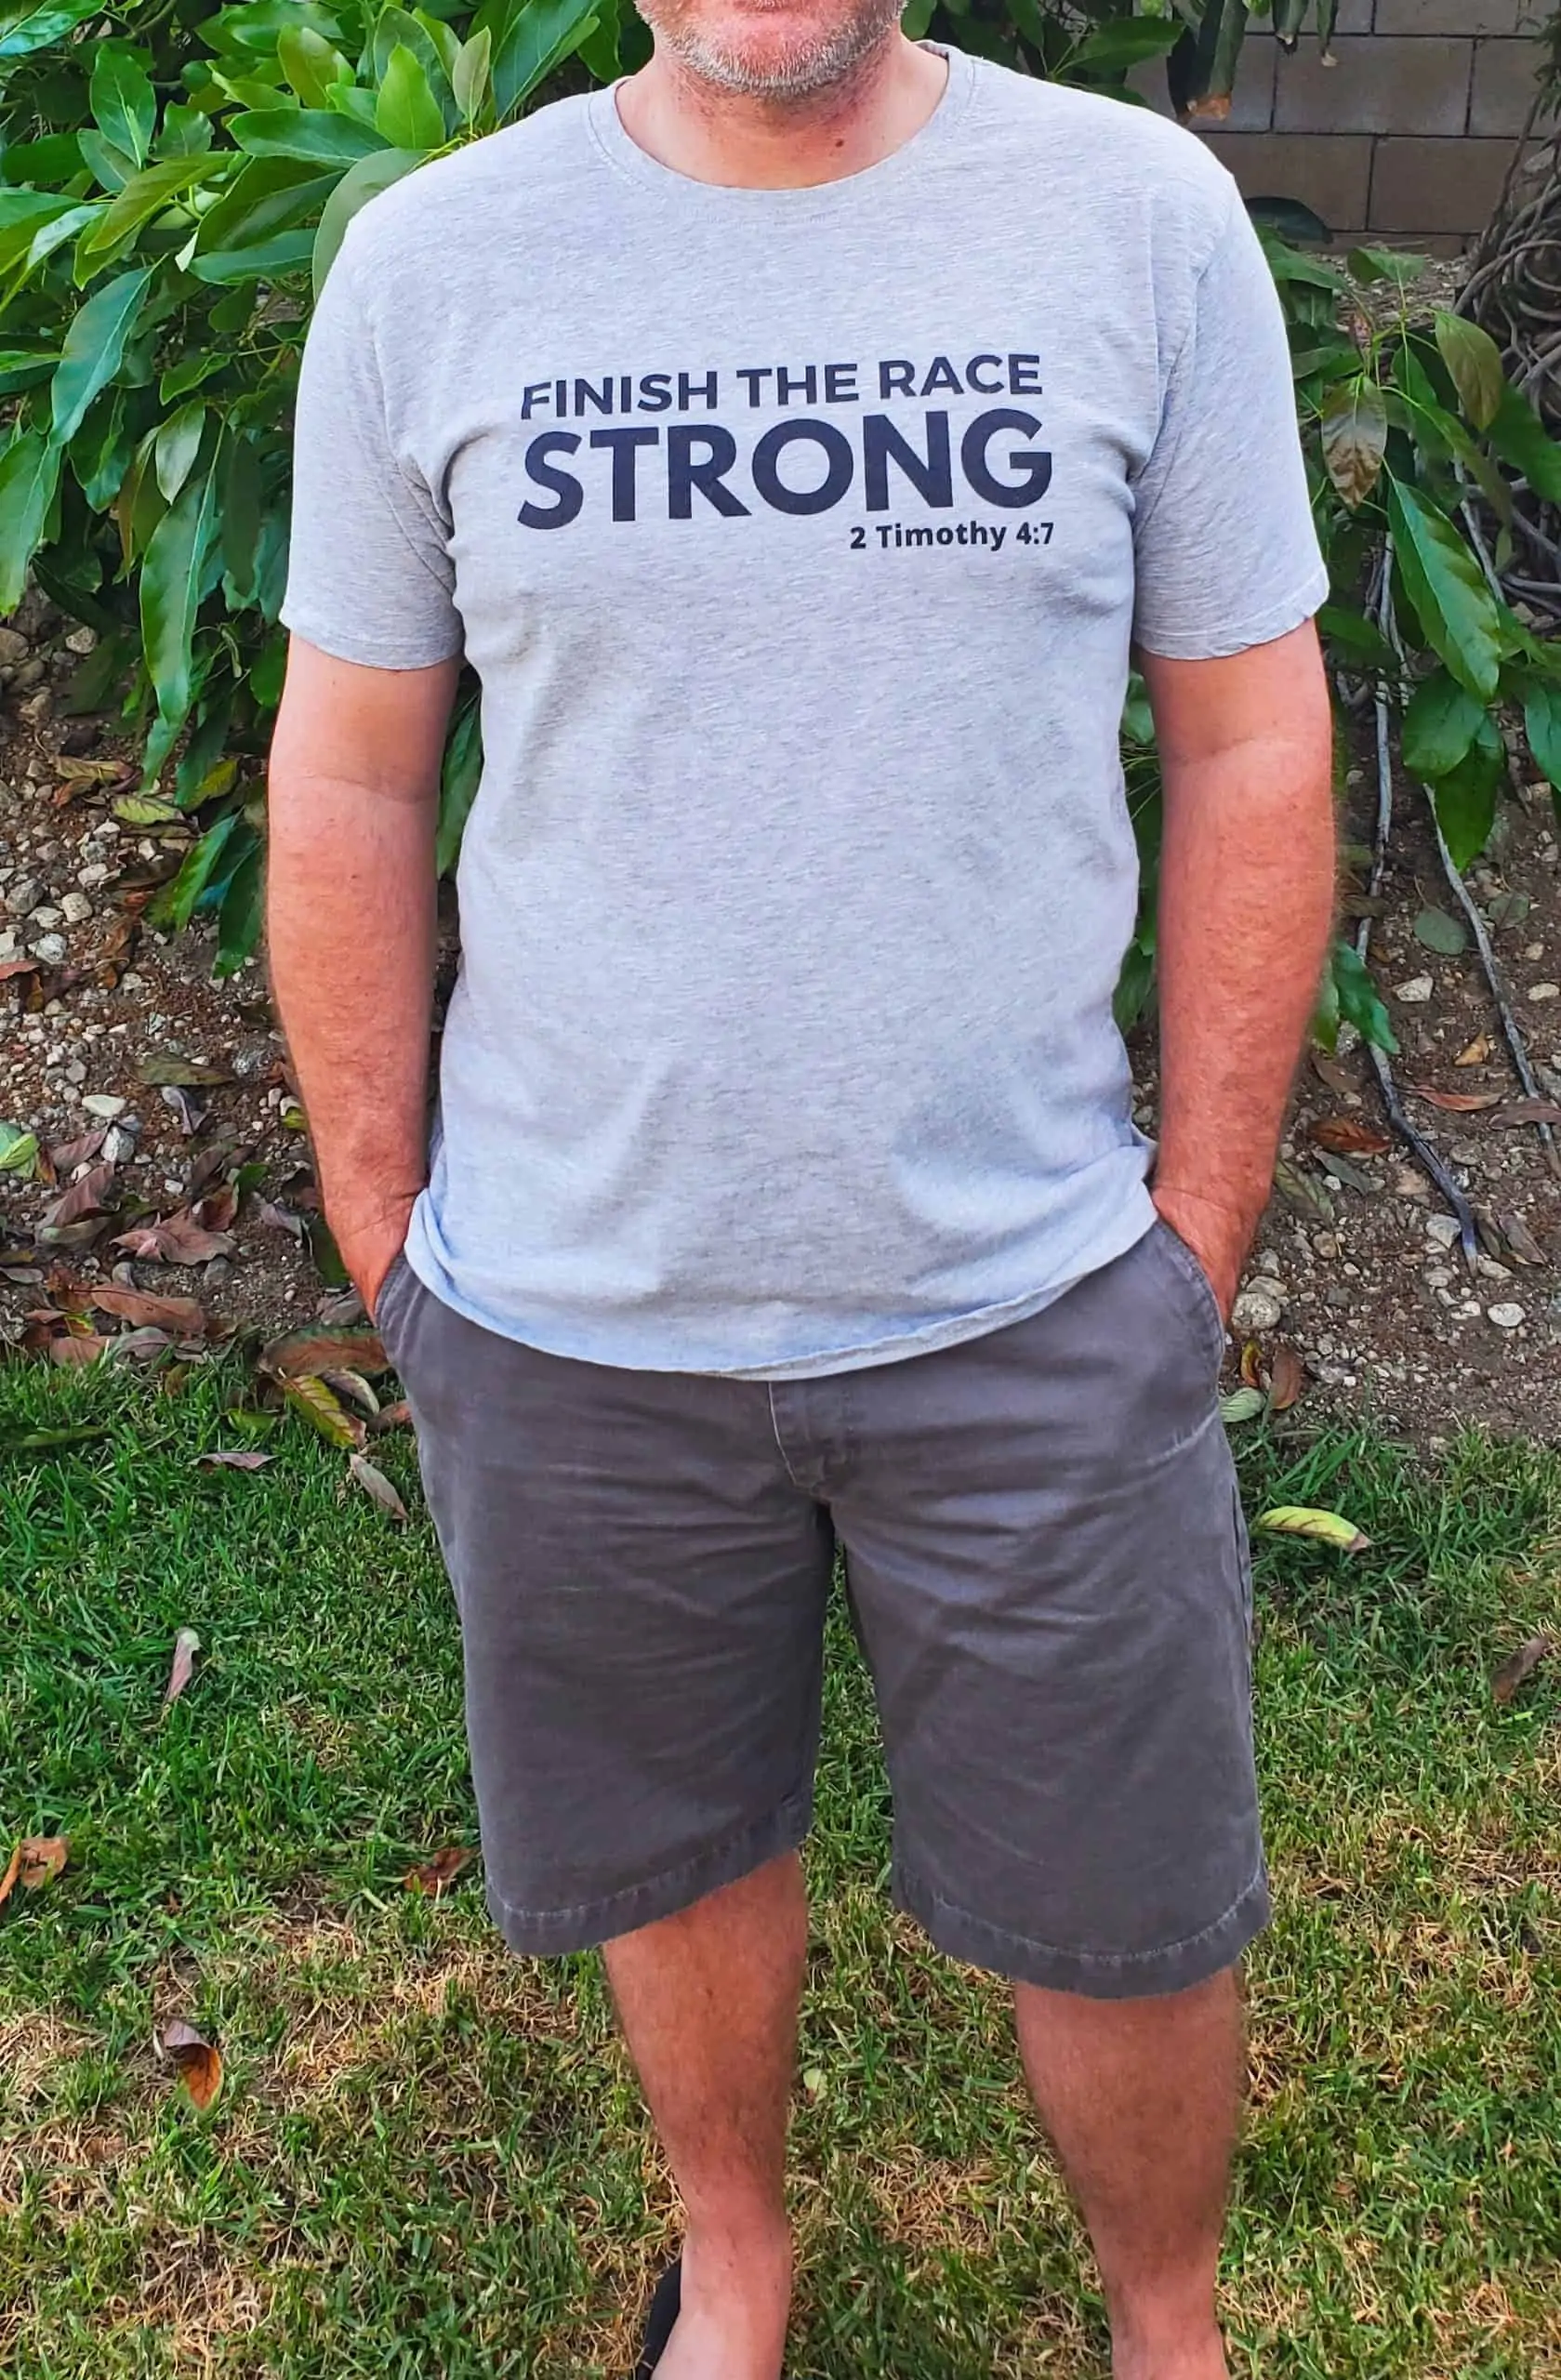 Finish the race strong Christian shirts for men